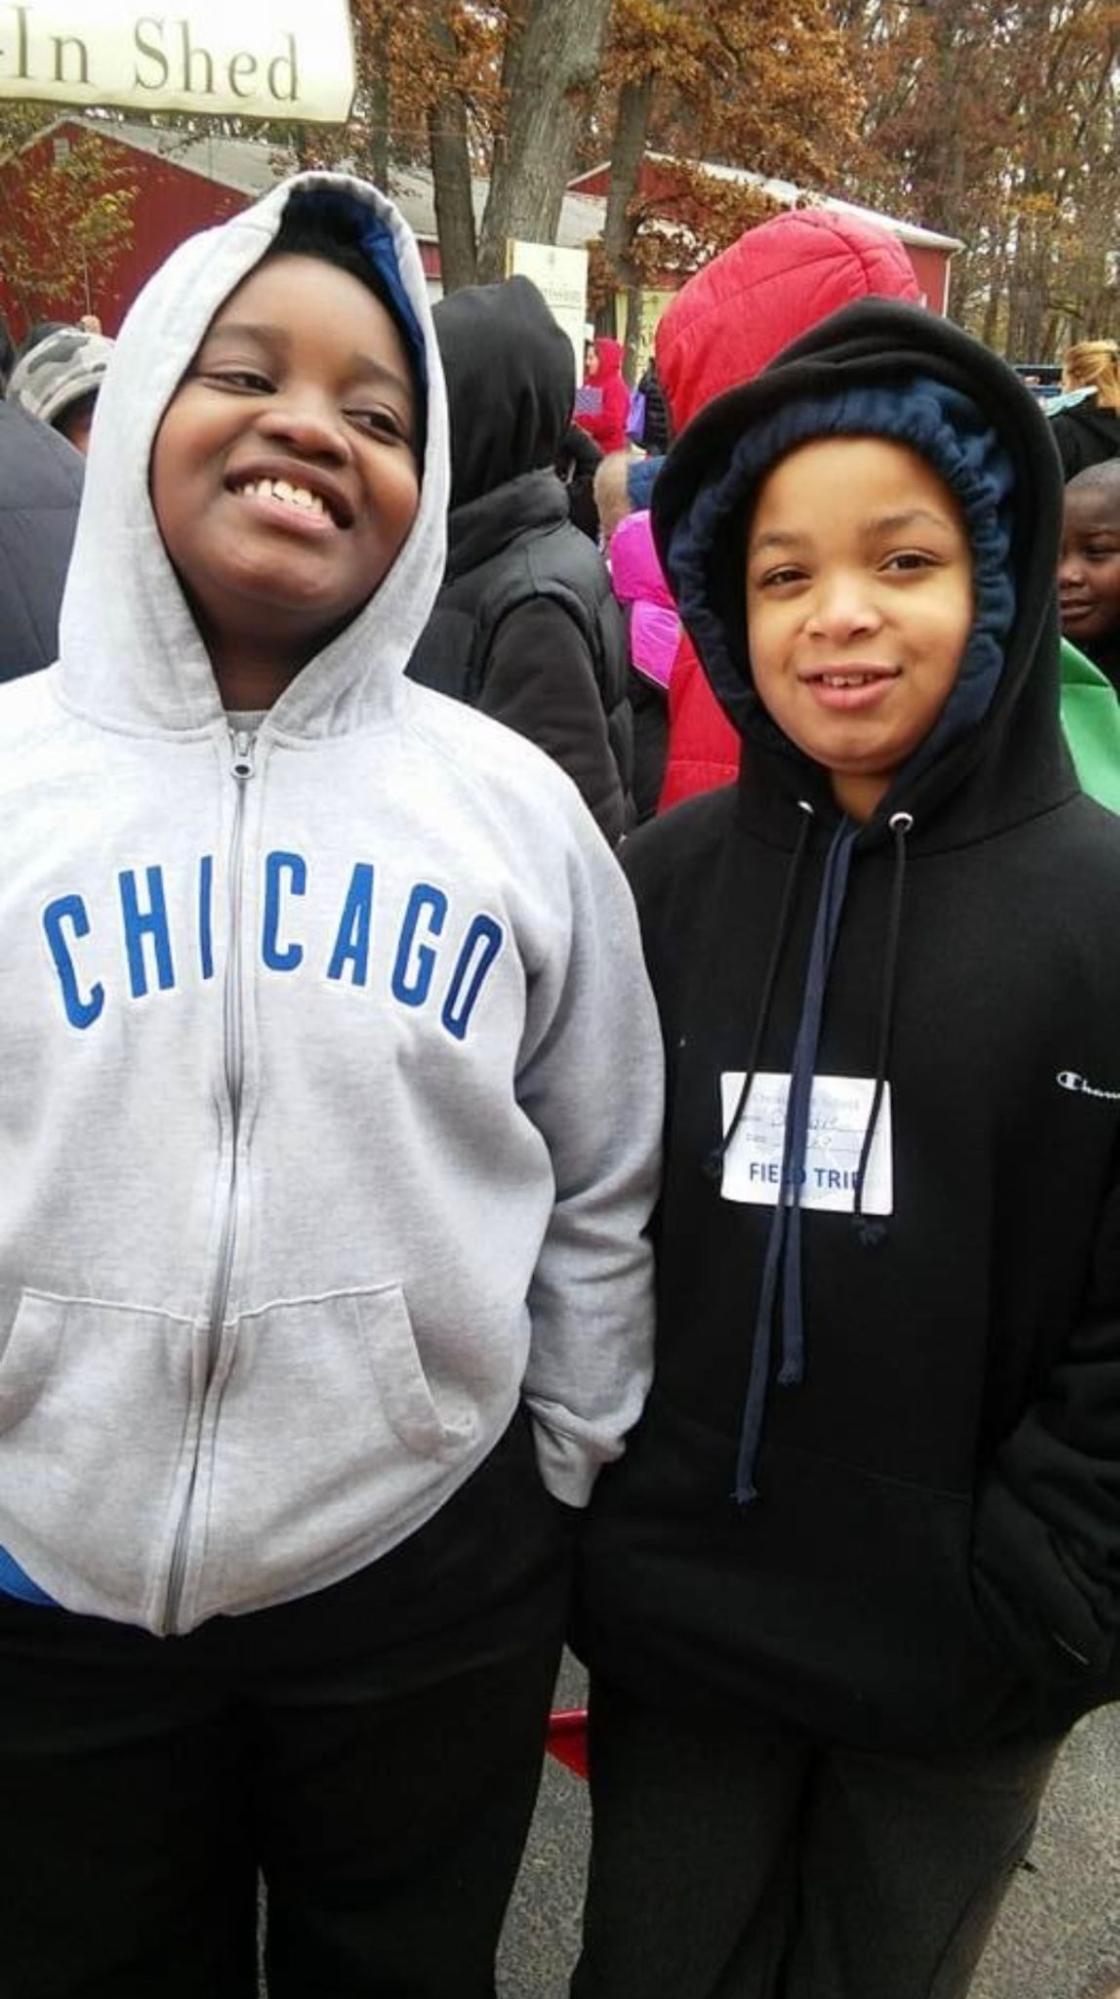 Two young Black boys wear hoodies and smile in the middle of a crowd outside. This is a photo of Deandre and Walter when they were much younger.